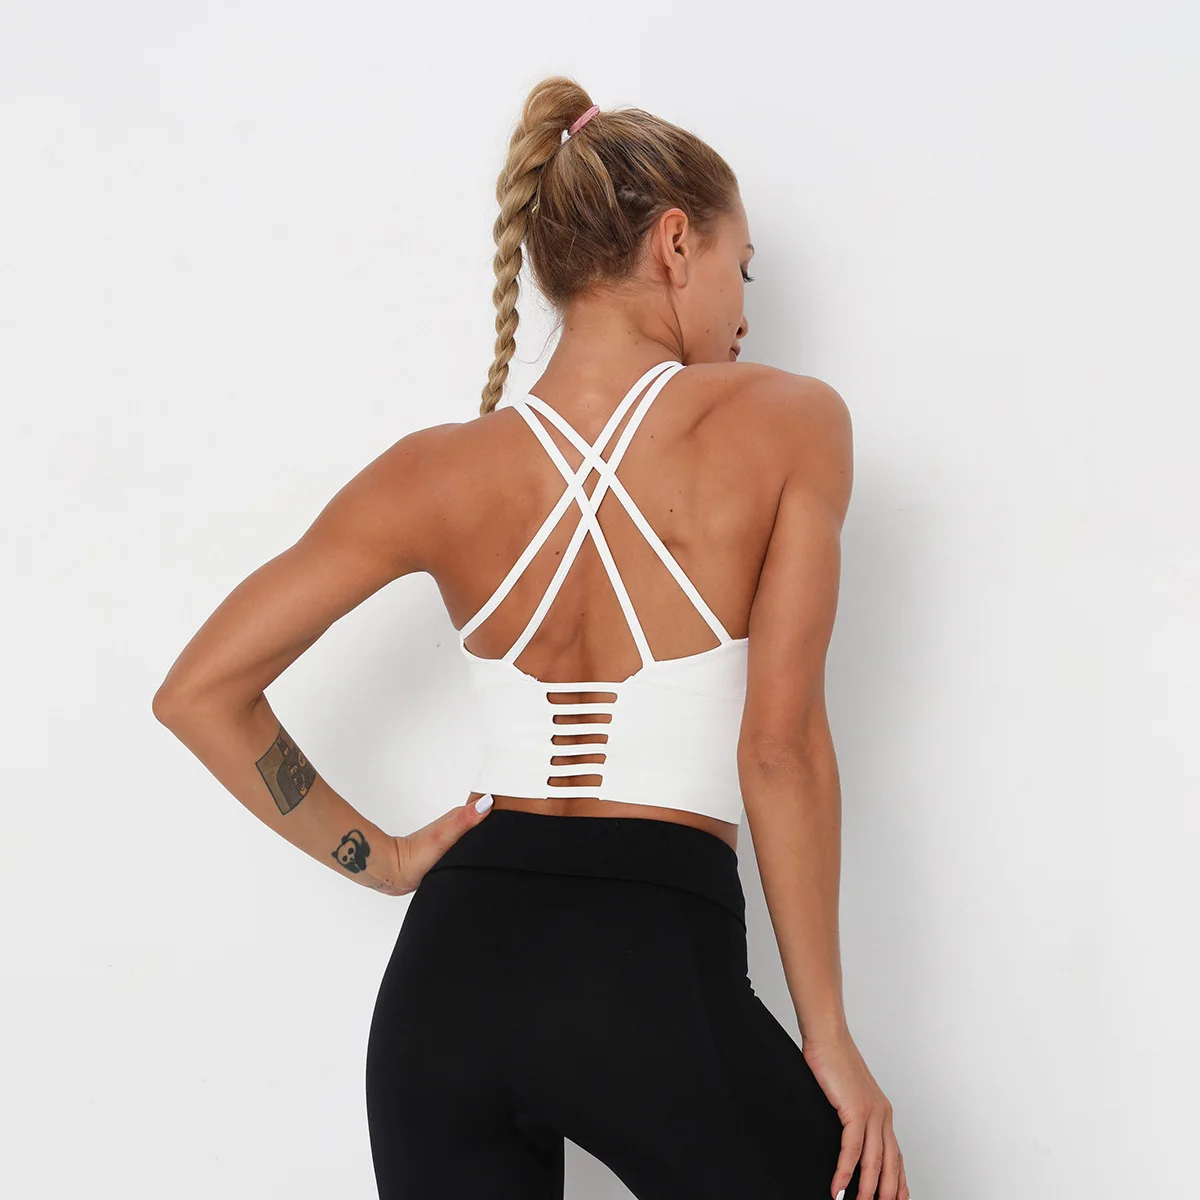 

VOMOO Cross Back Sport Padded Strappy Criss Cross Cropped Bras for Yoga Workout Fitness Low Impact for Running Yoga